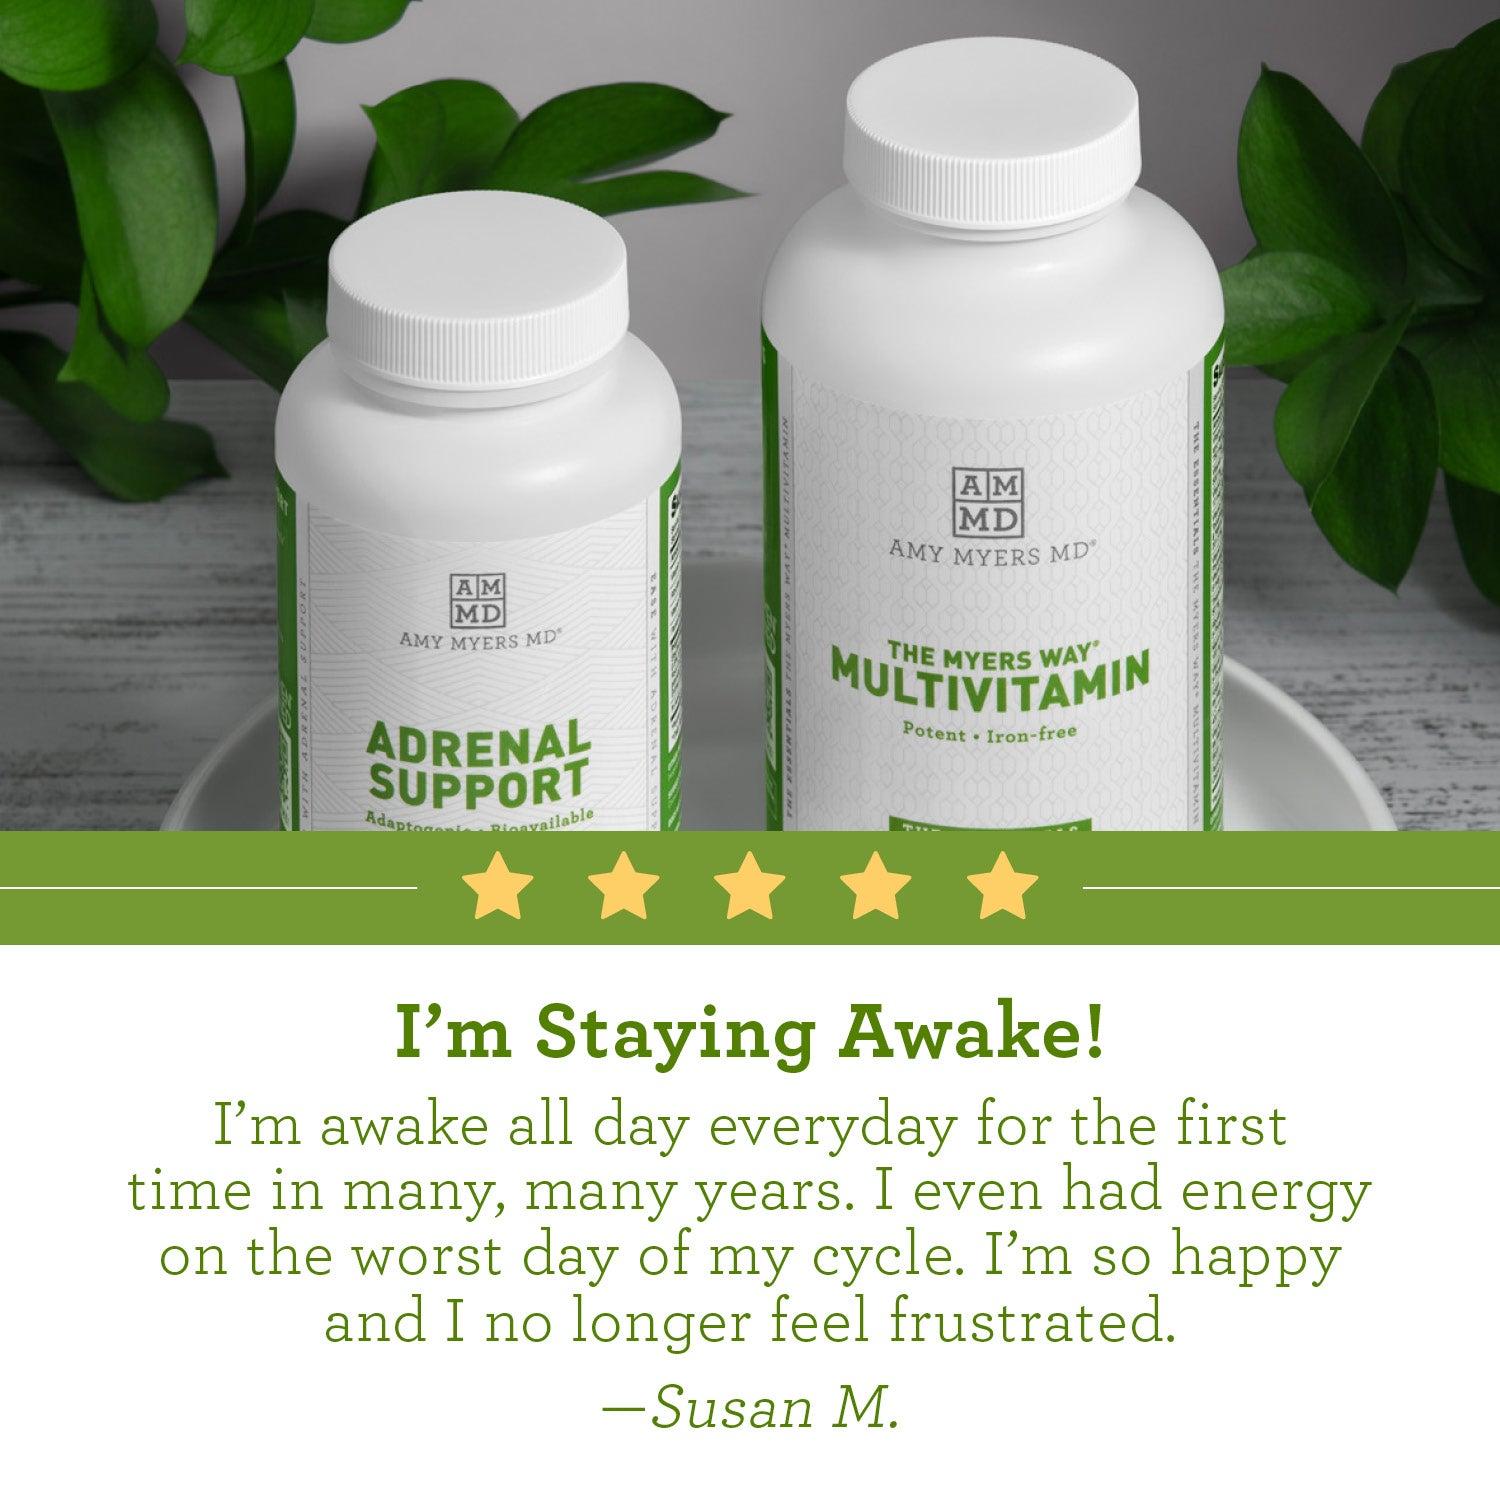 Cutomer review: "I'm Staying Awake! I'm awake all day everyday for the first time in many many years. I even had energy on the worst day of my cycle.  Im so happy and I no longer feel frustrated." - Susan M. 